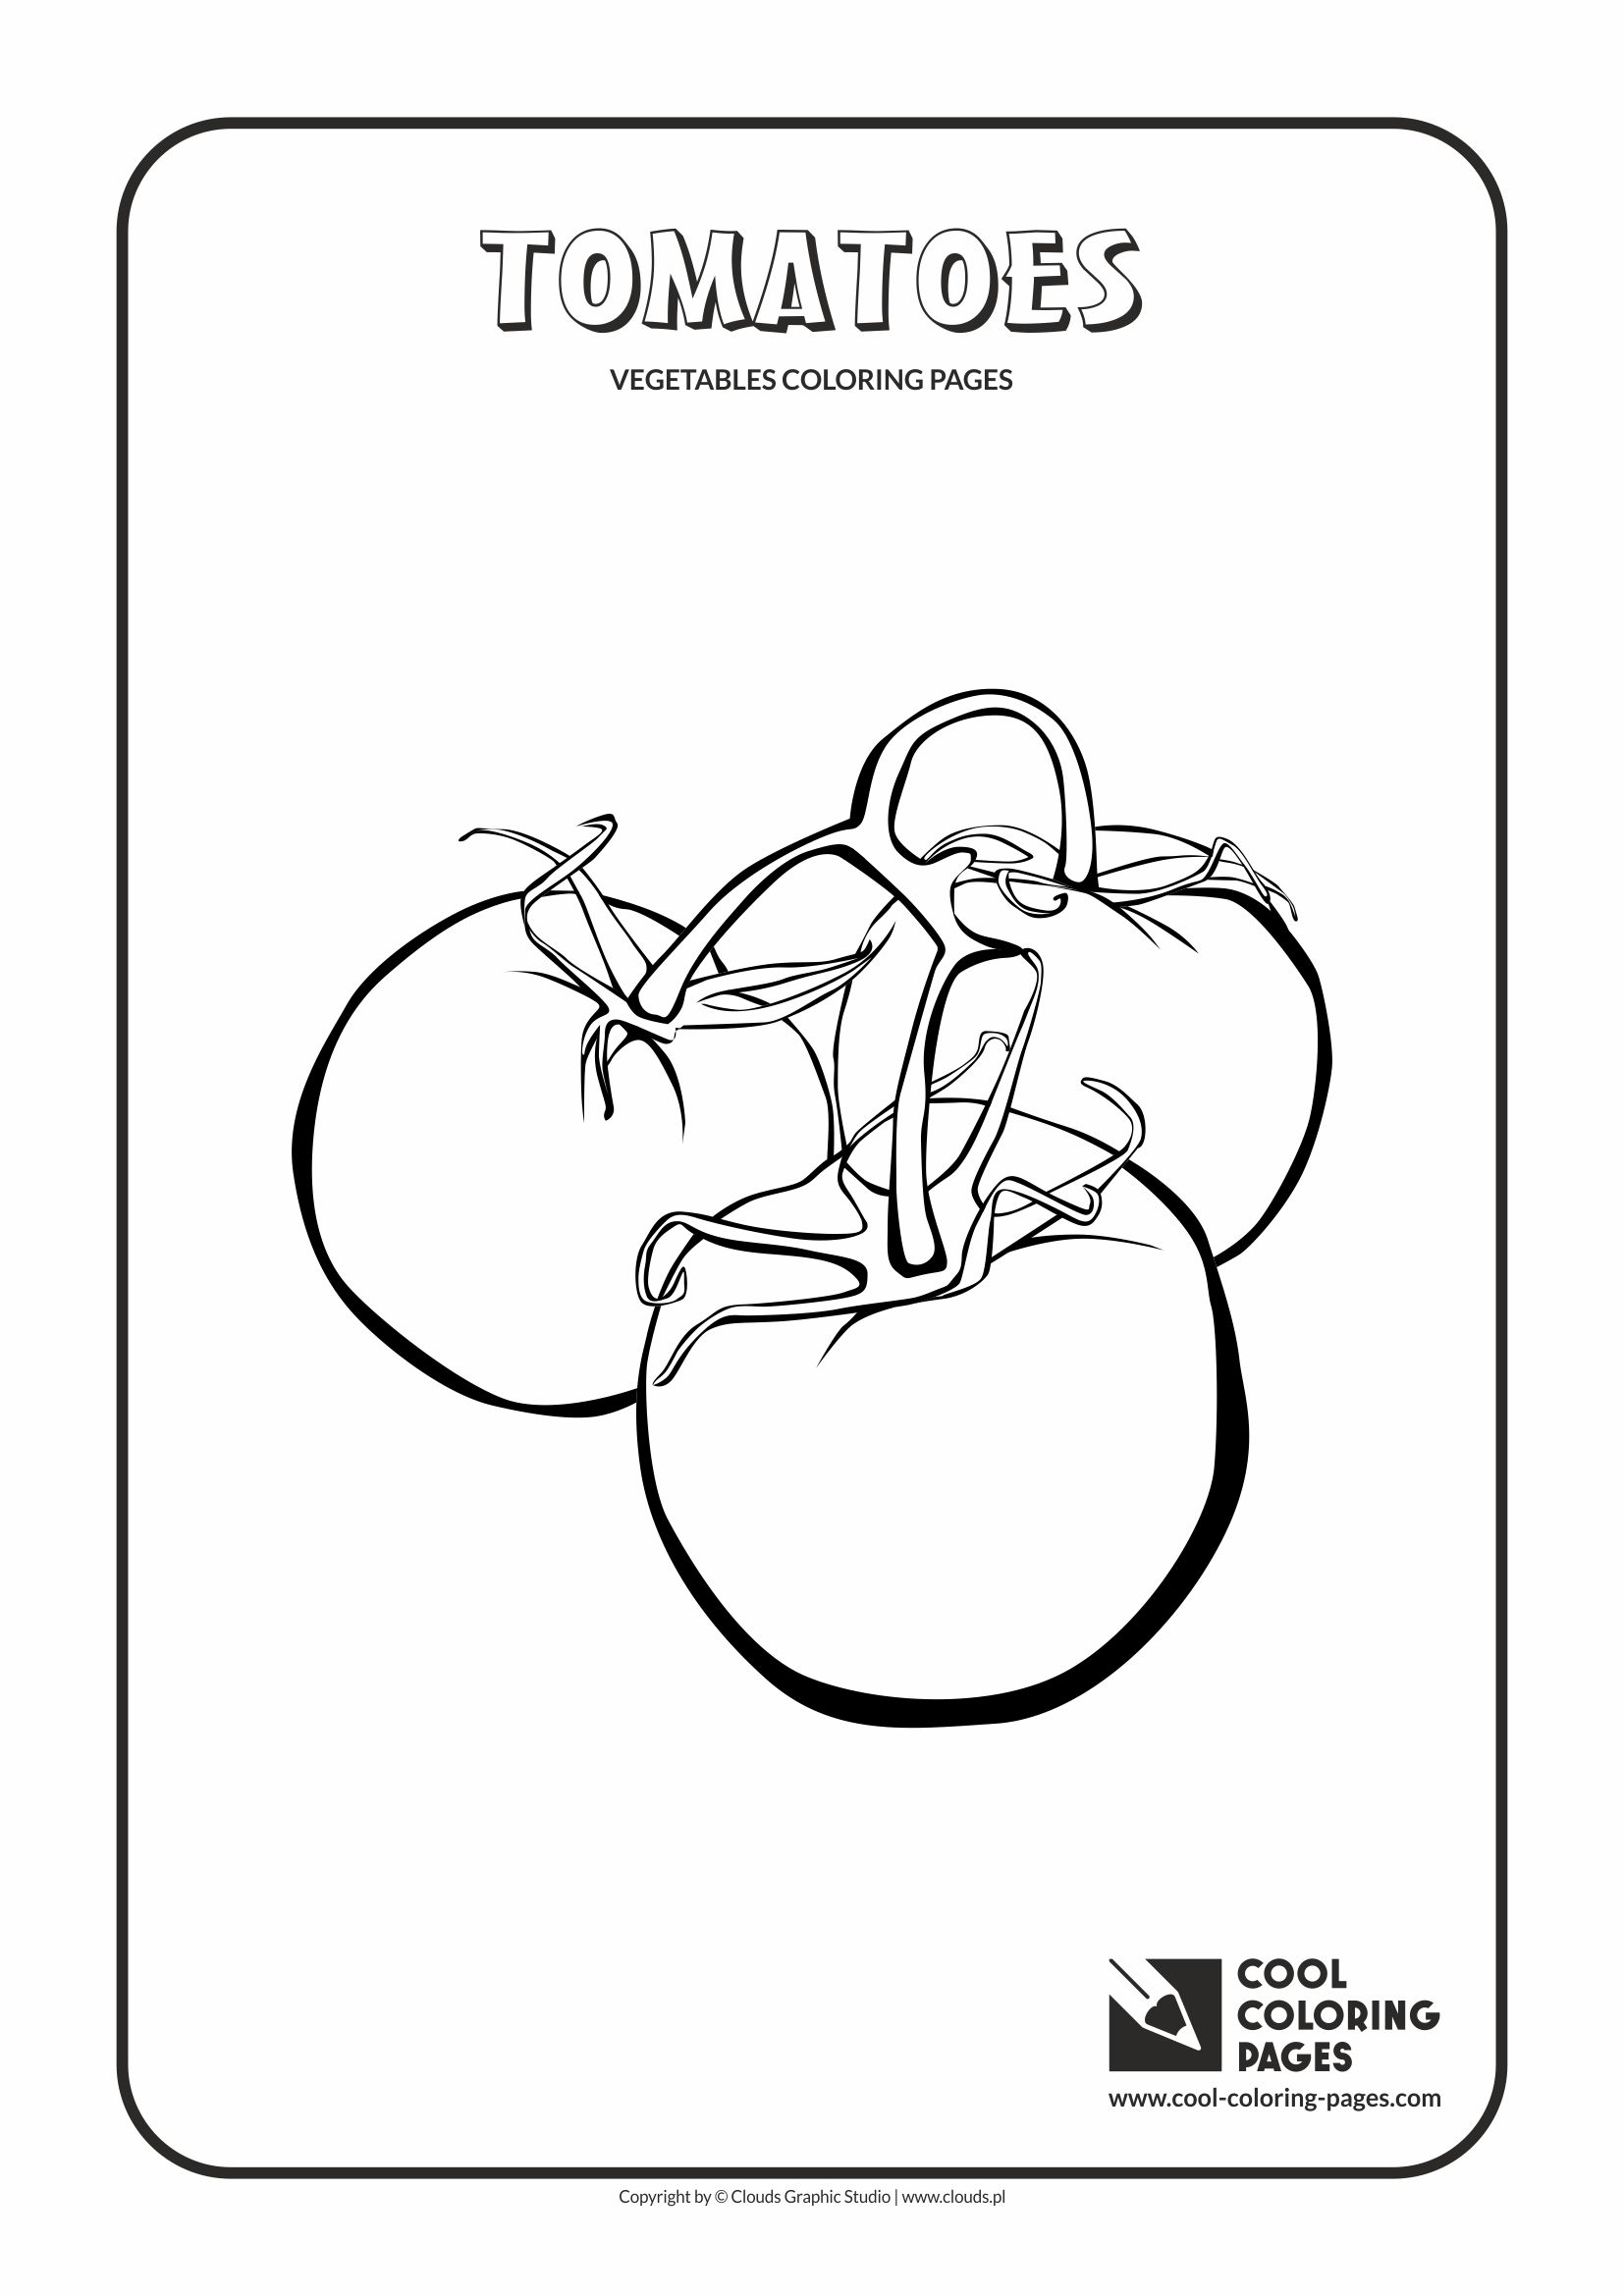 Cool Coloring Pages - Plants / Tomatoes / Coloring page with tomatoes